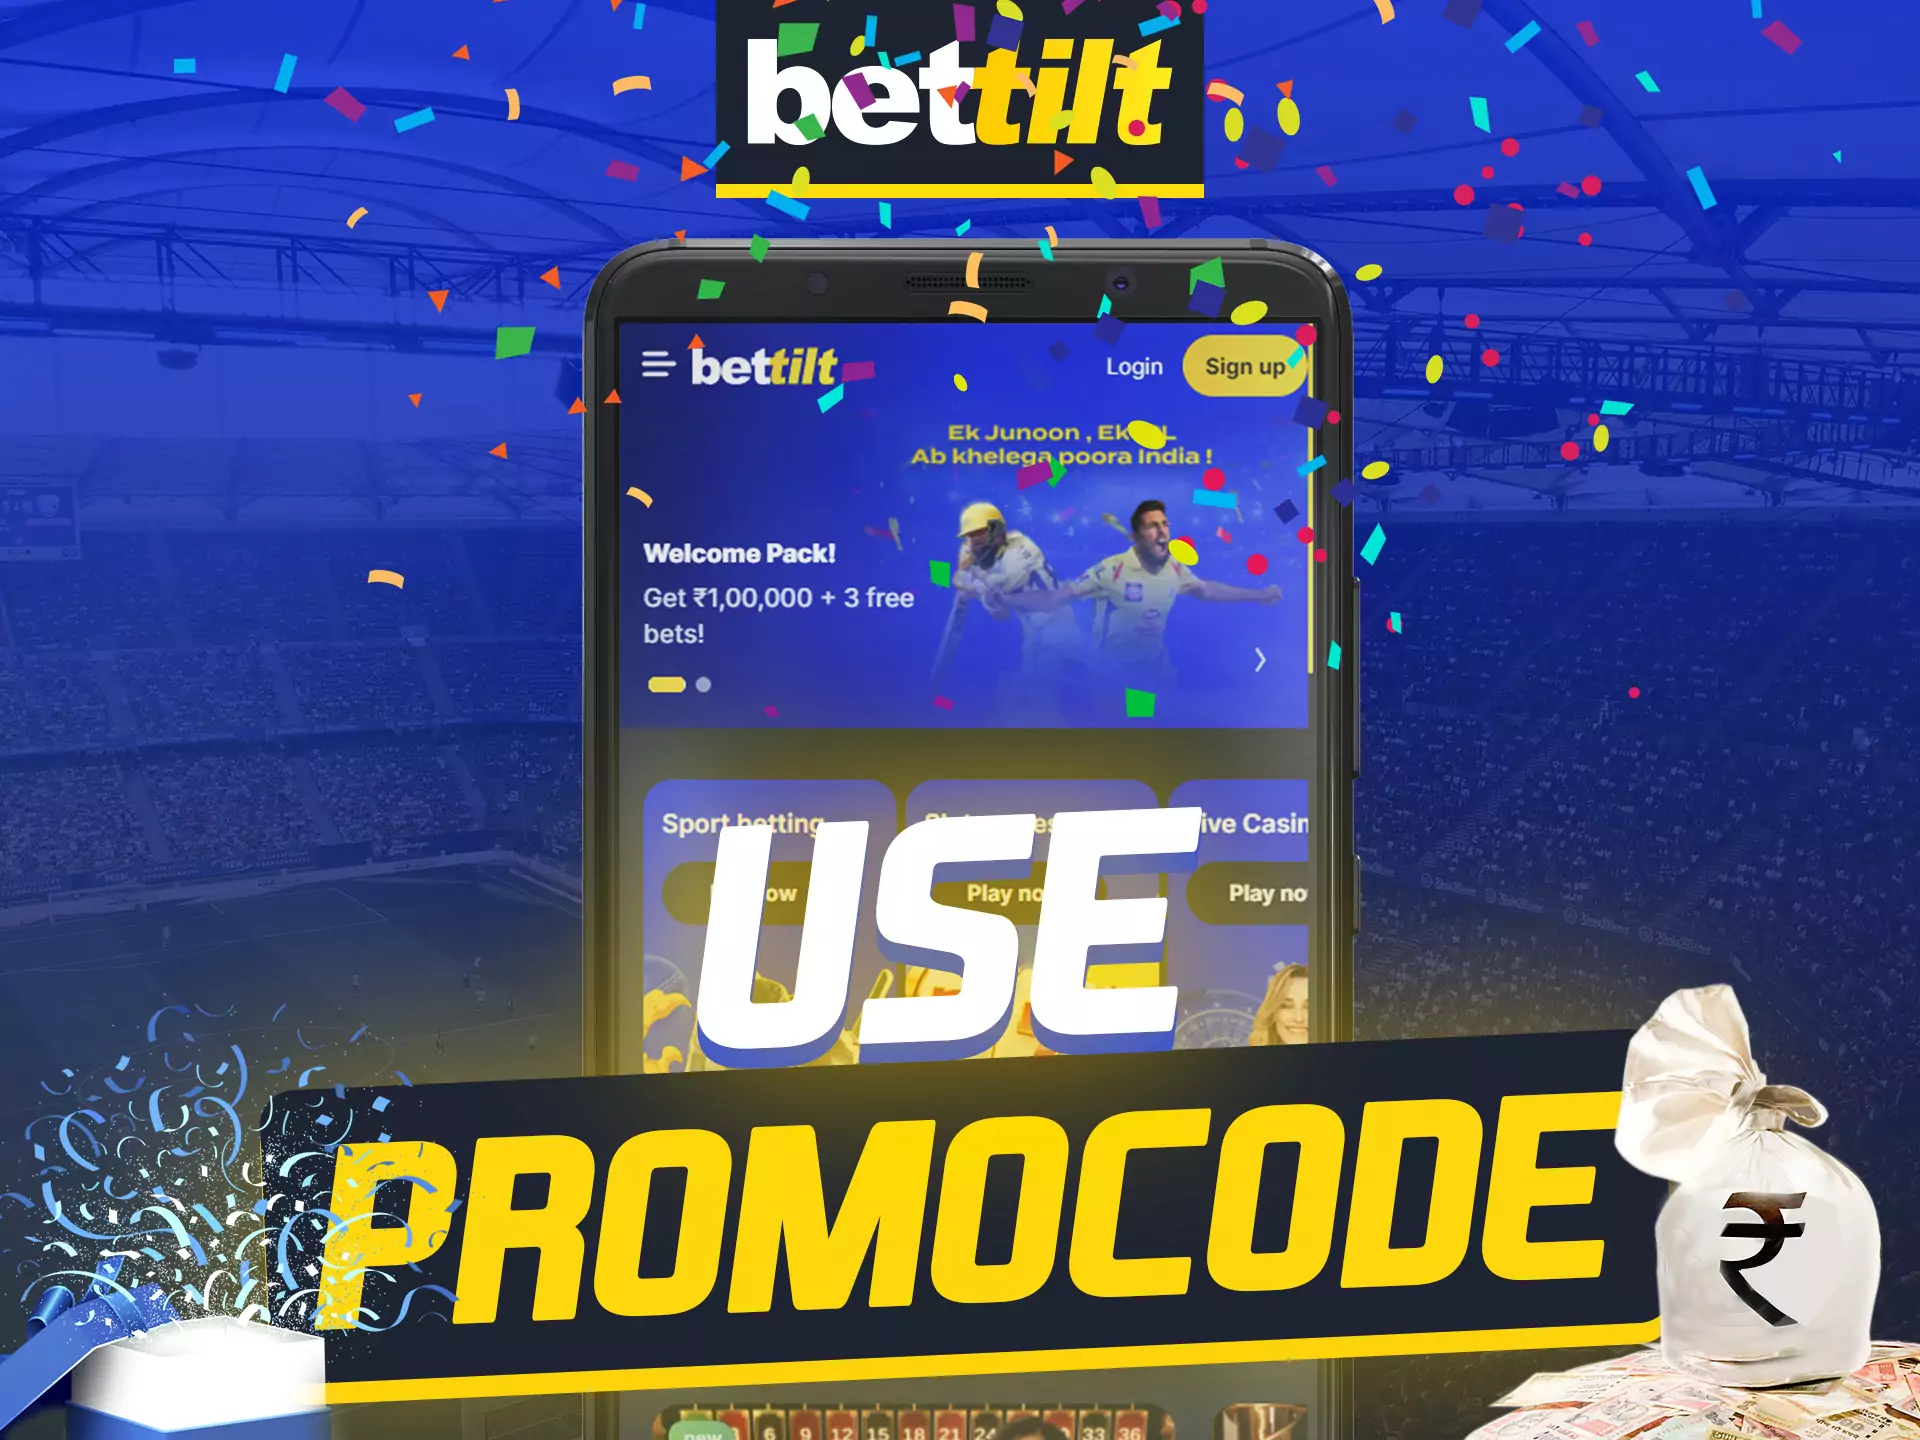 During registration, apply a promo code for the Bettilt app to get an extra bonus.